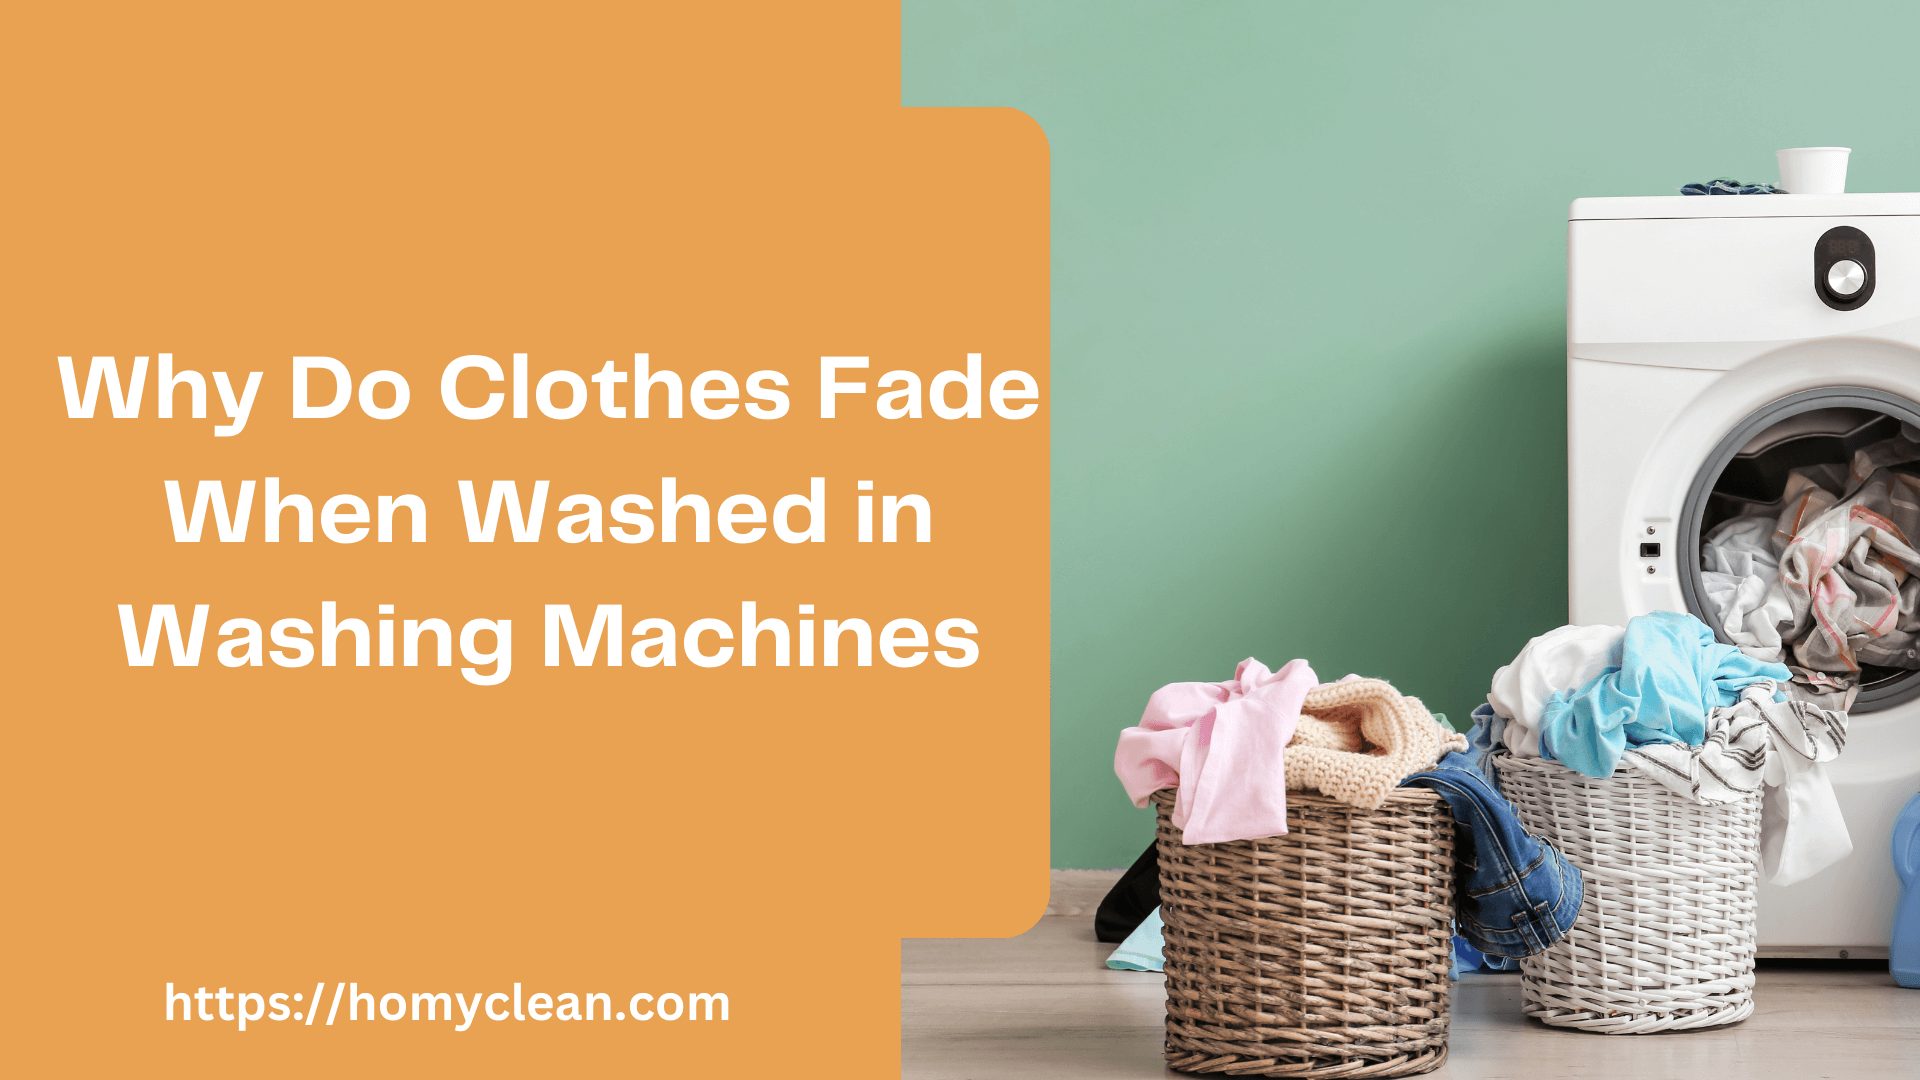 Why Do Clothes Fade When Washed in Washing Machines?